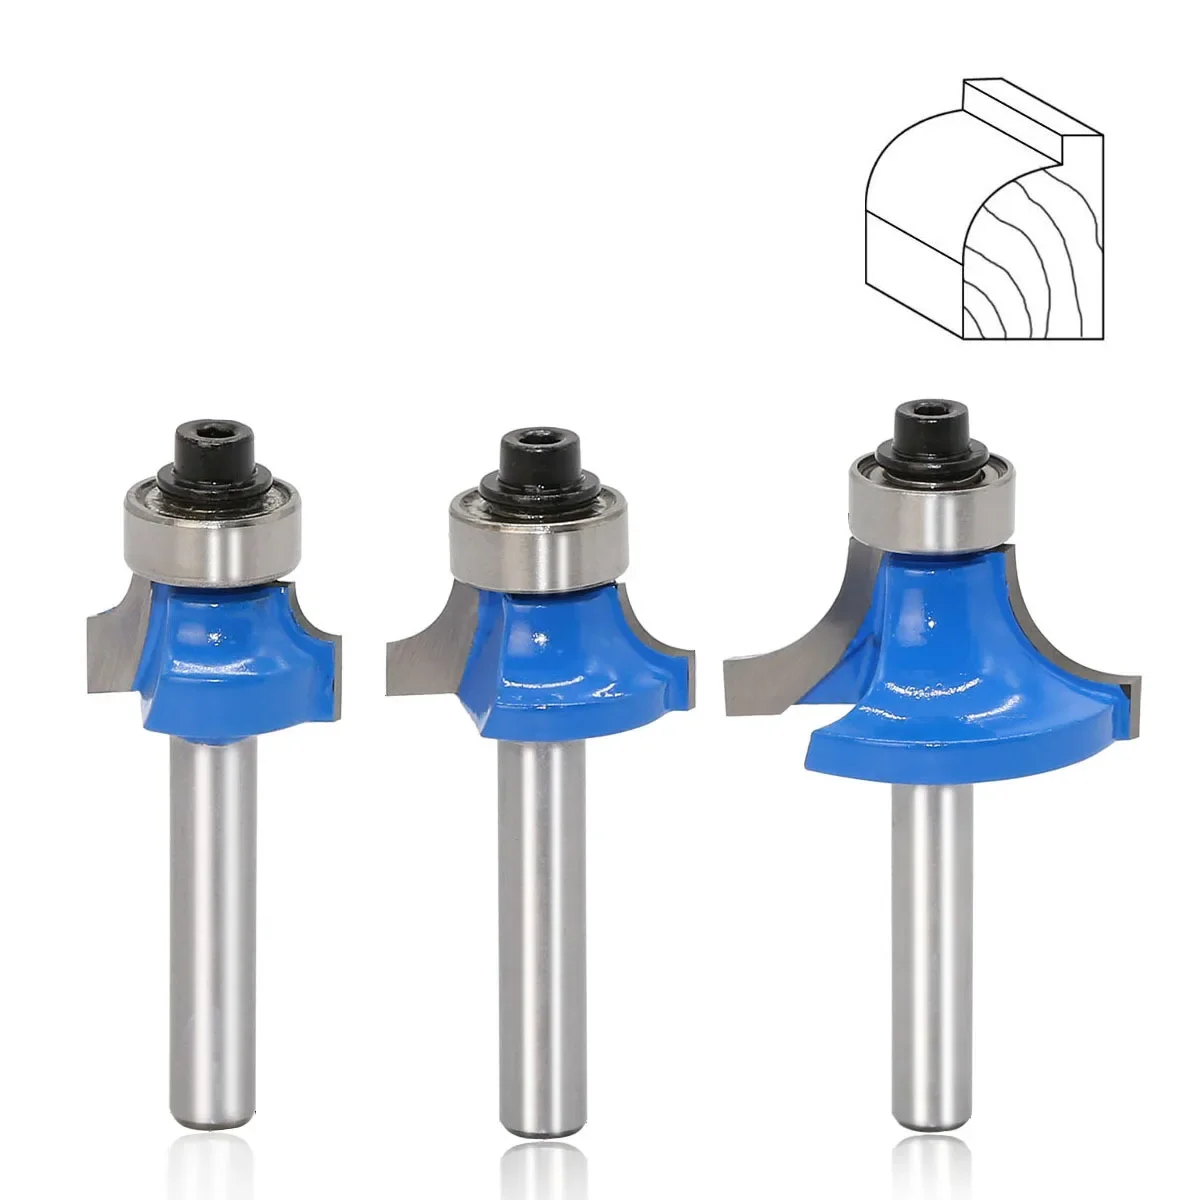 

3pc 1/4 Shank Round-Over Router Bits for wood Woodworking Tool 2 flute endmill with bearing milling cutter Corner Round Over Bit